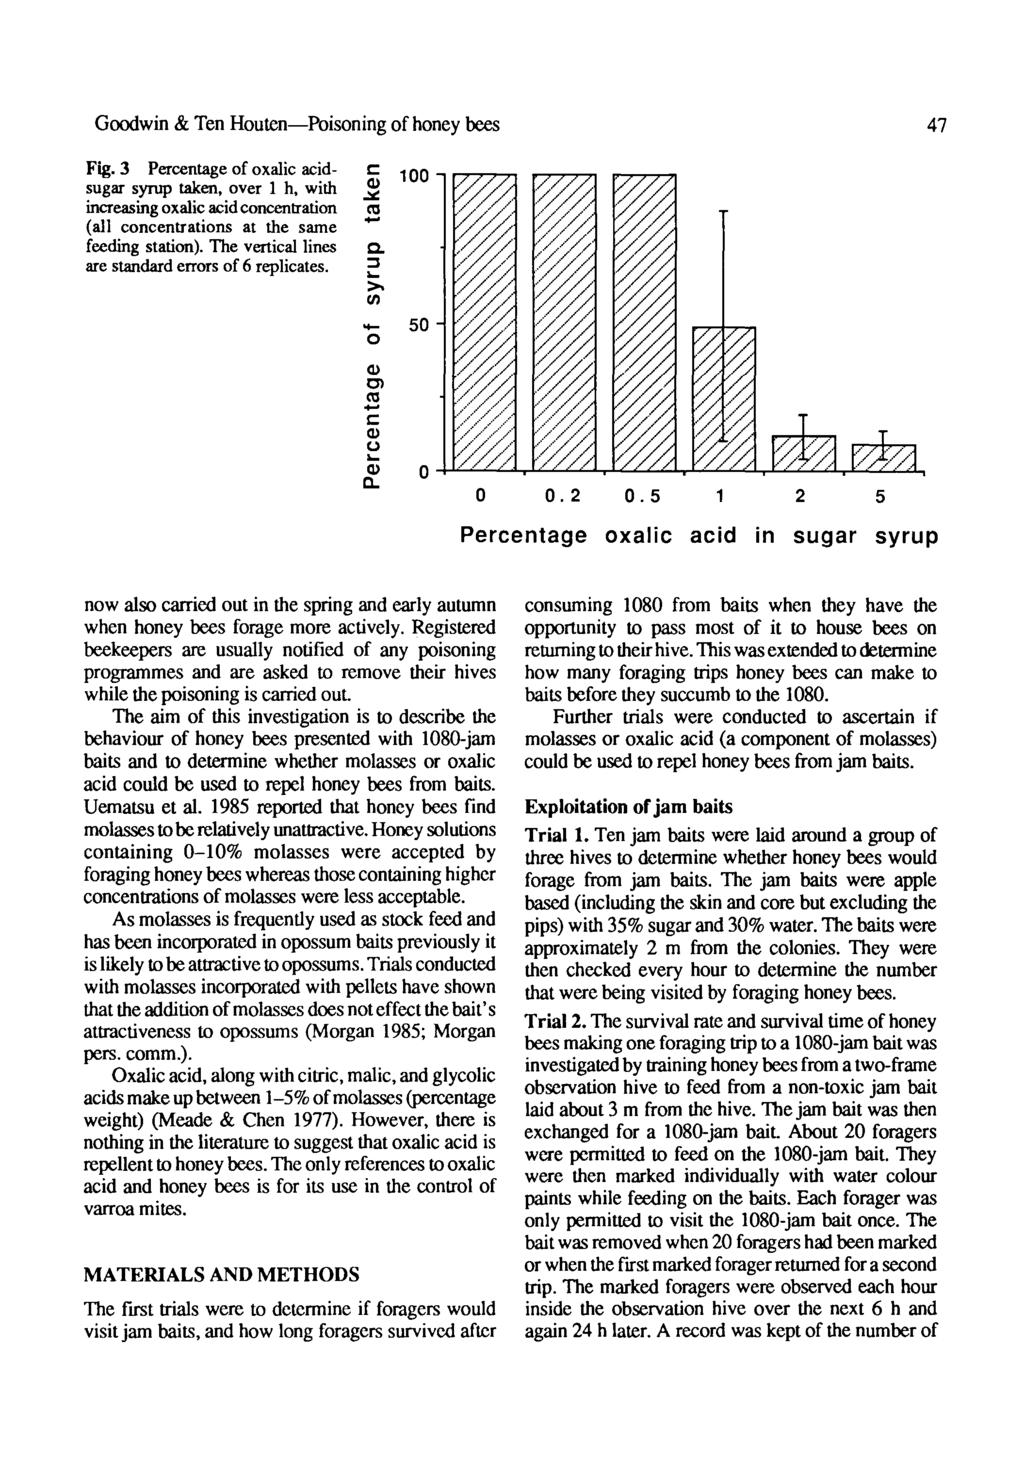 Goodwin & Ten Houten-Poisoning of honey bees 47 Downloaded by [6.234.11.221] at 2:16 28 February 216 Fig. 3 Percentage of oxalic acid-!